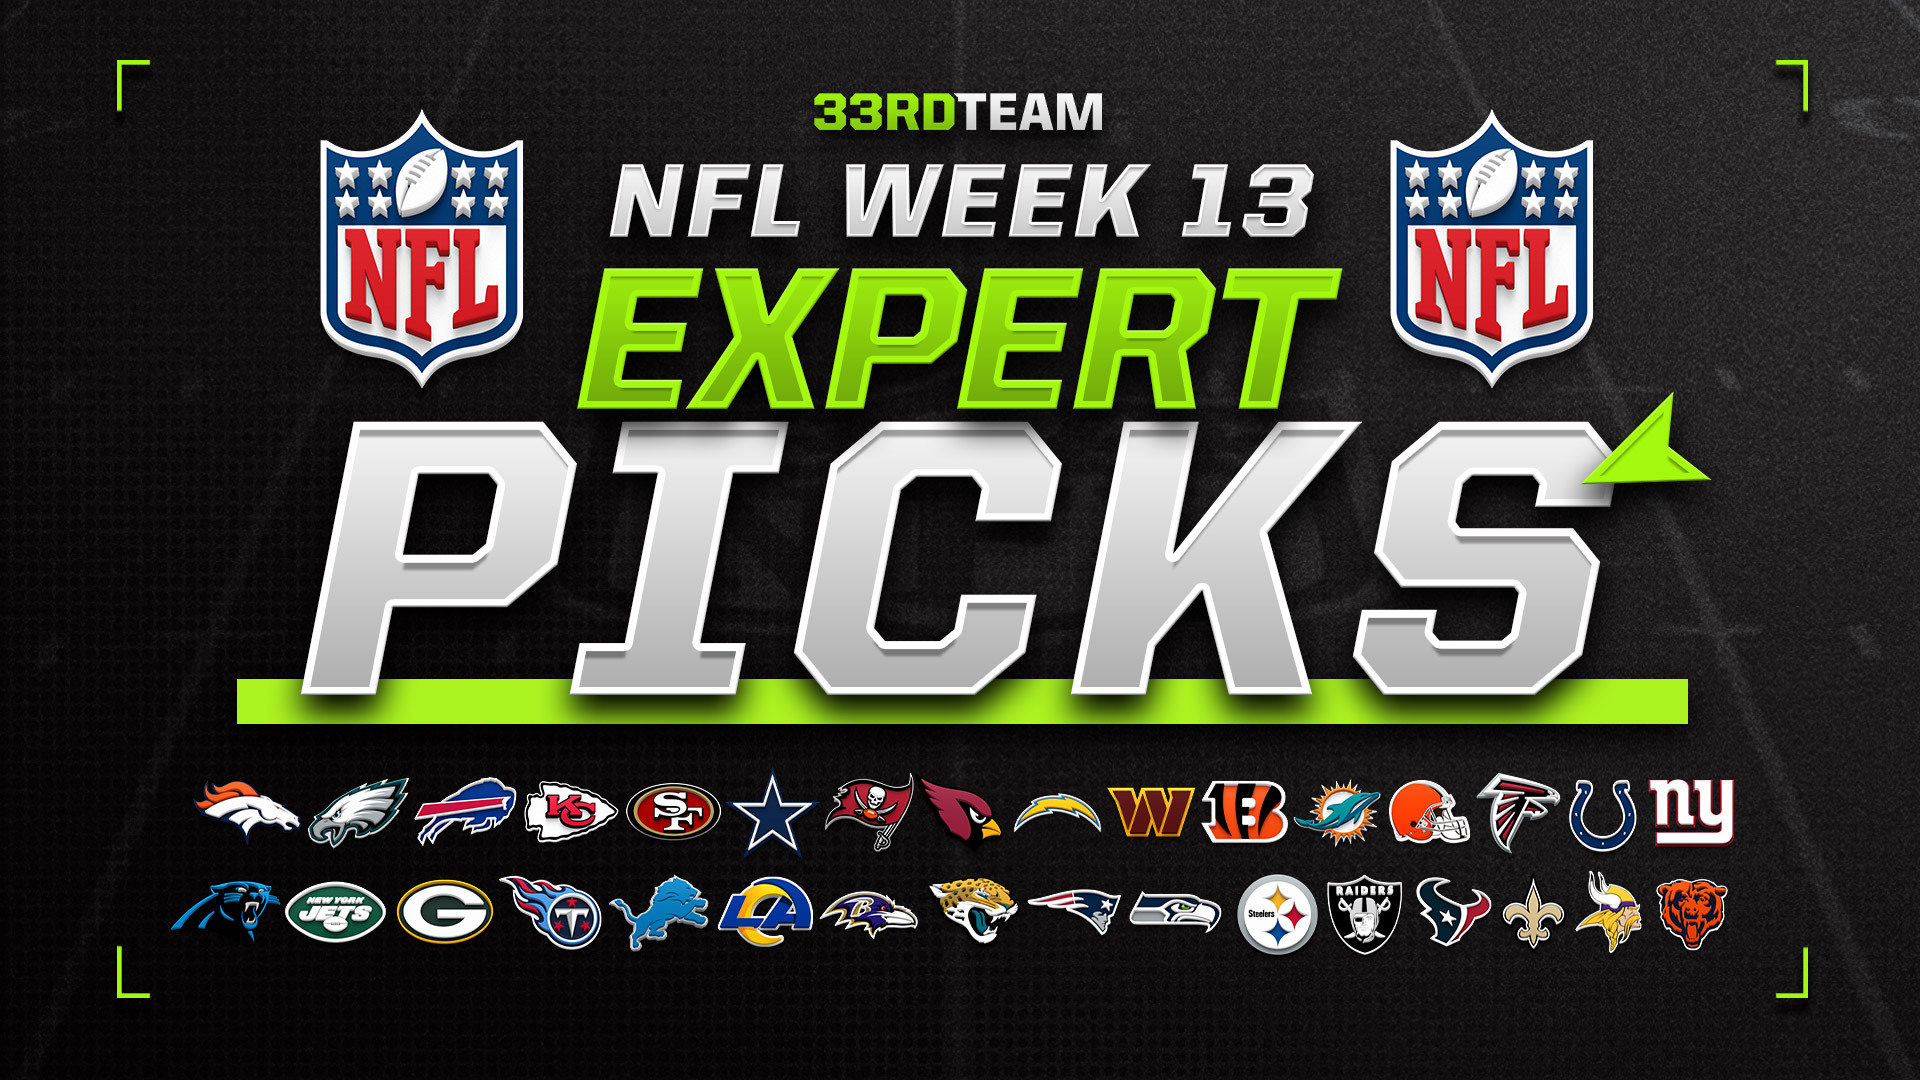 Logos for all 32 NFL teams with text that reads "NFL Week 13 Expert Picks"